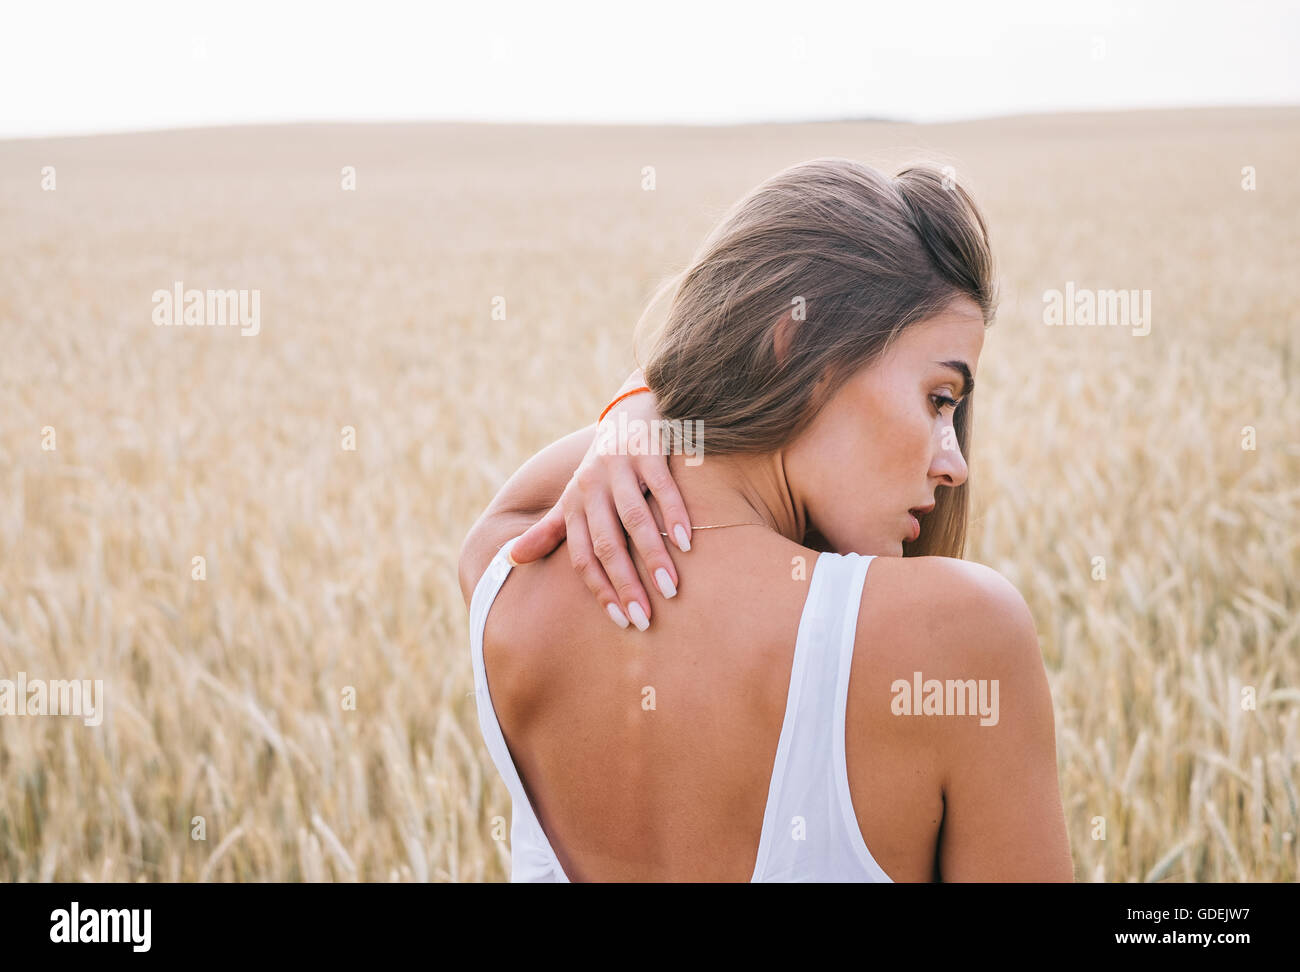 Woman standing in wheat field Stock Photo